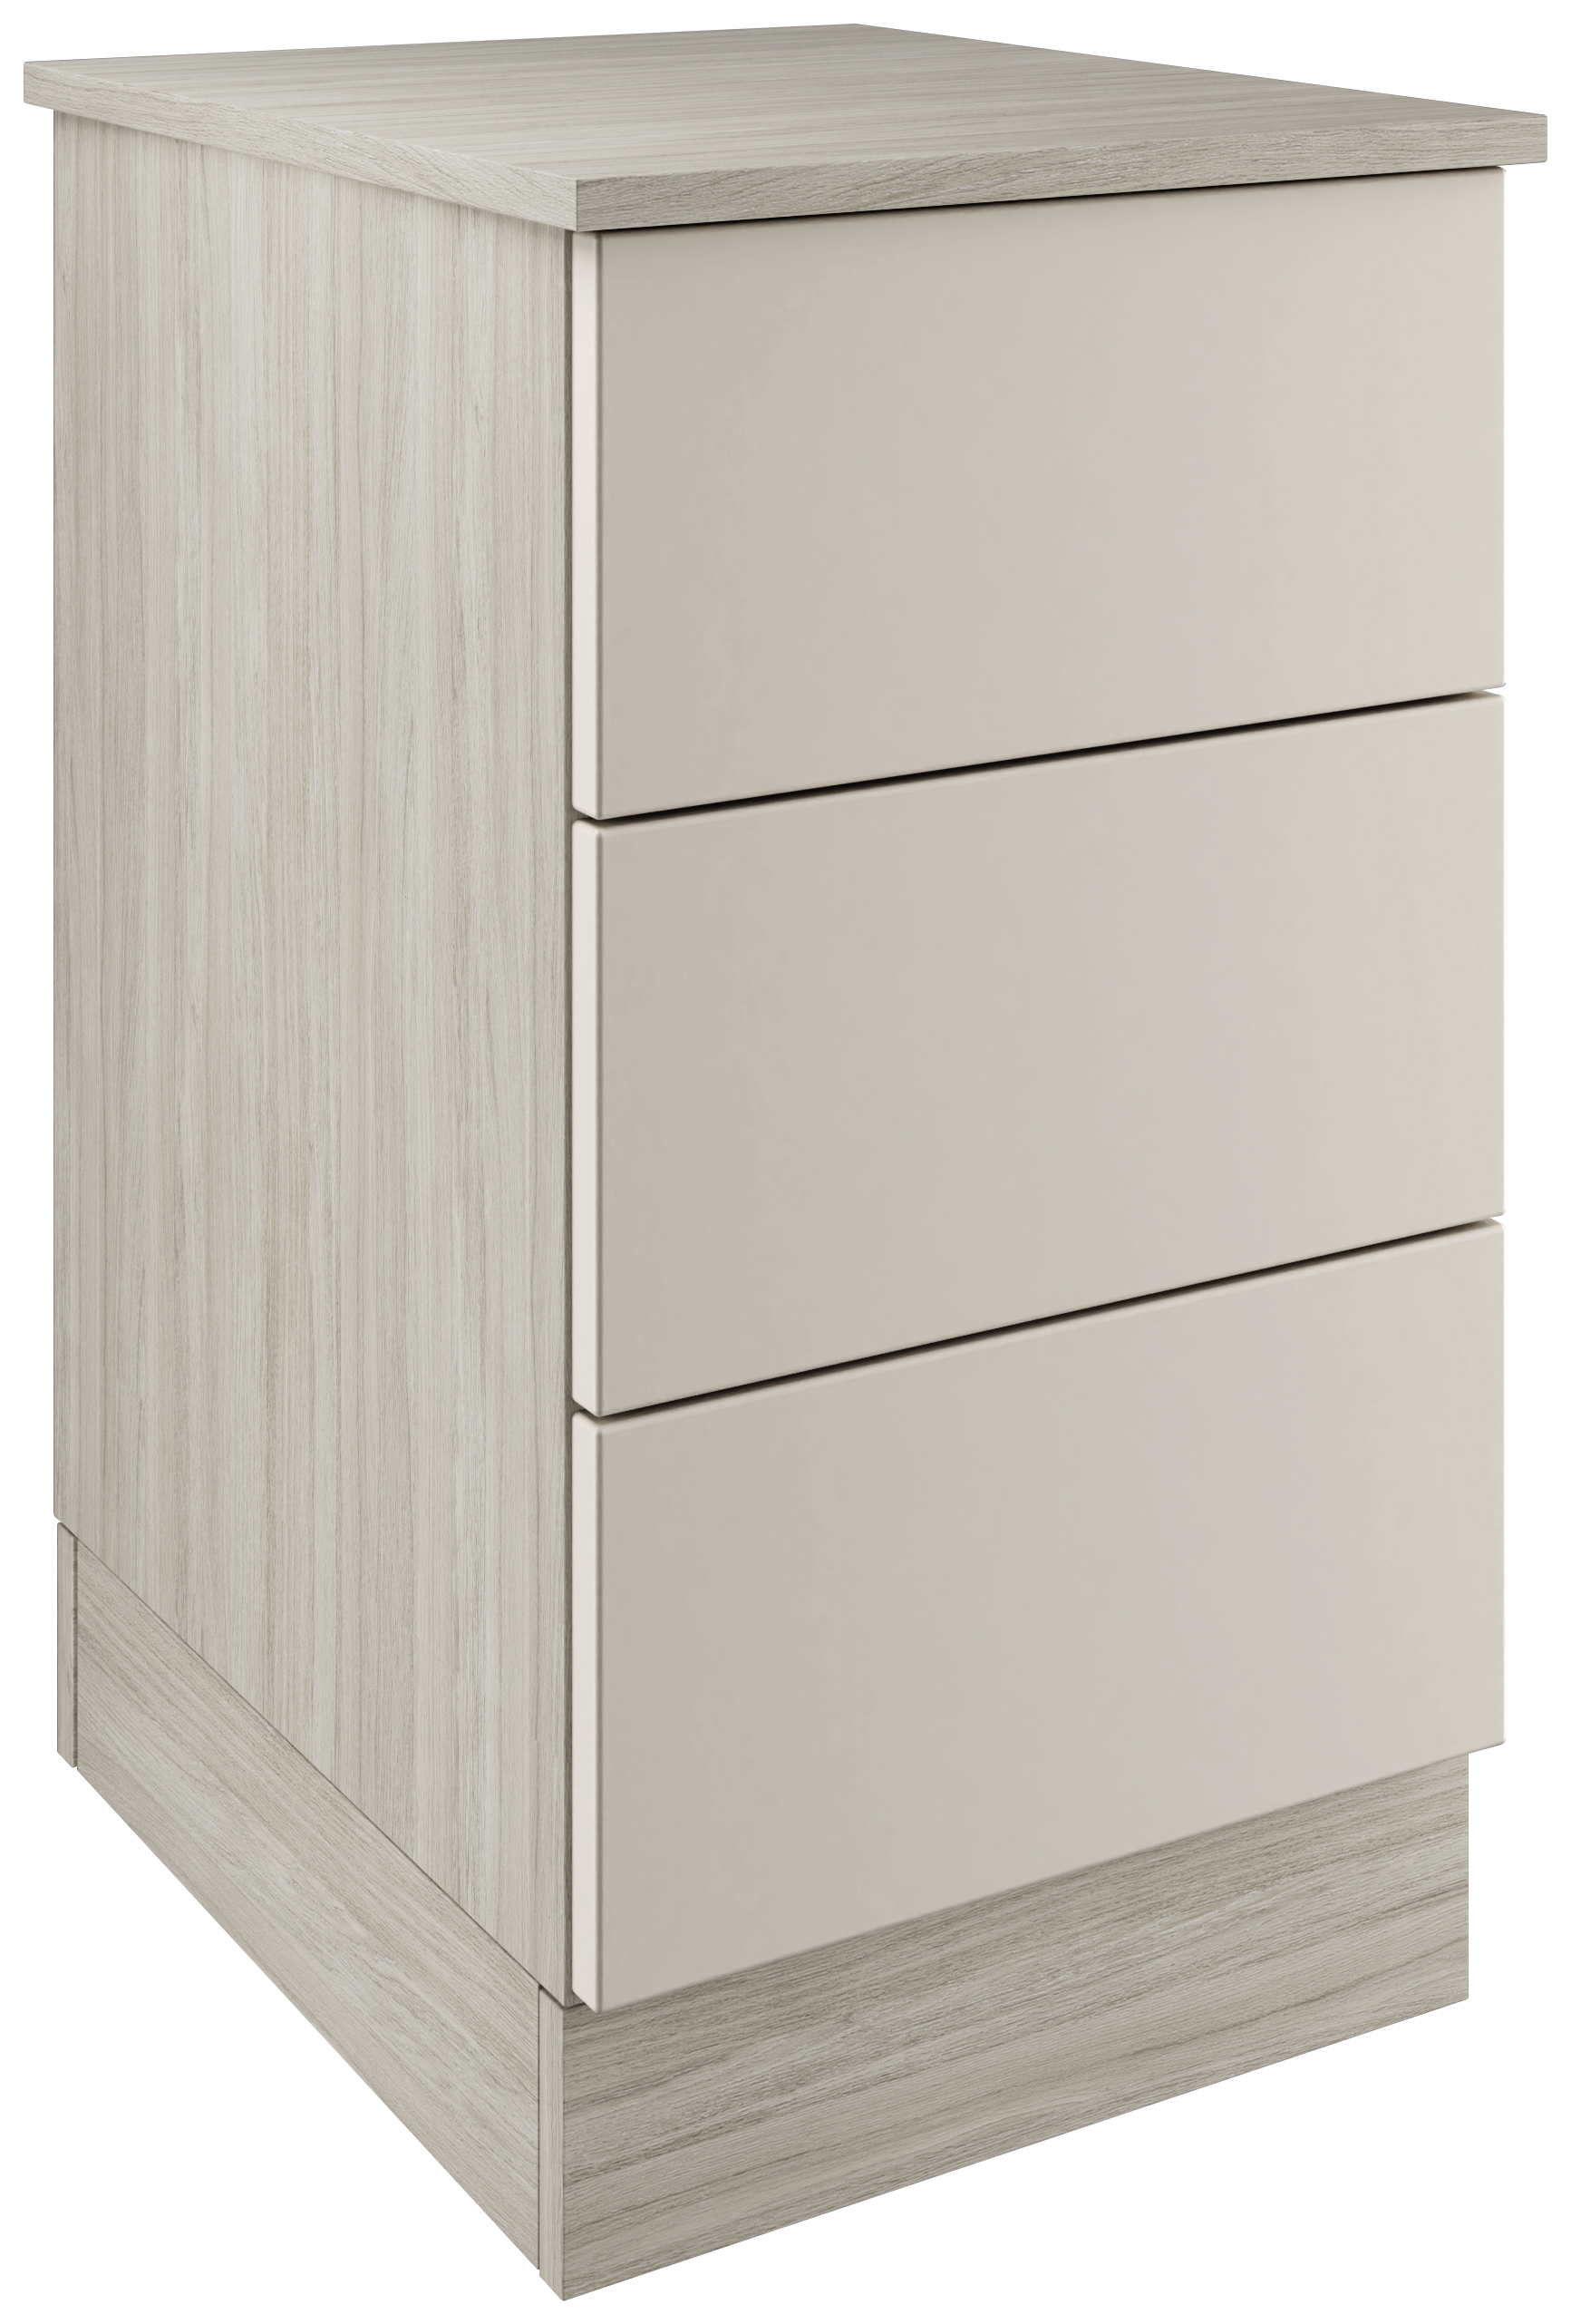 Harrogate & Bramham Taupe Grey Single Chest with 3 Drawers - 420 x 730 x 520mm